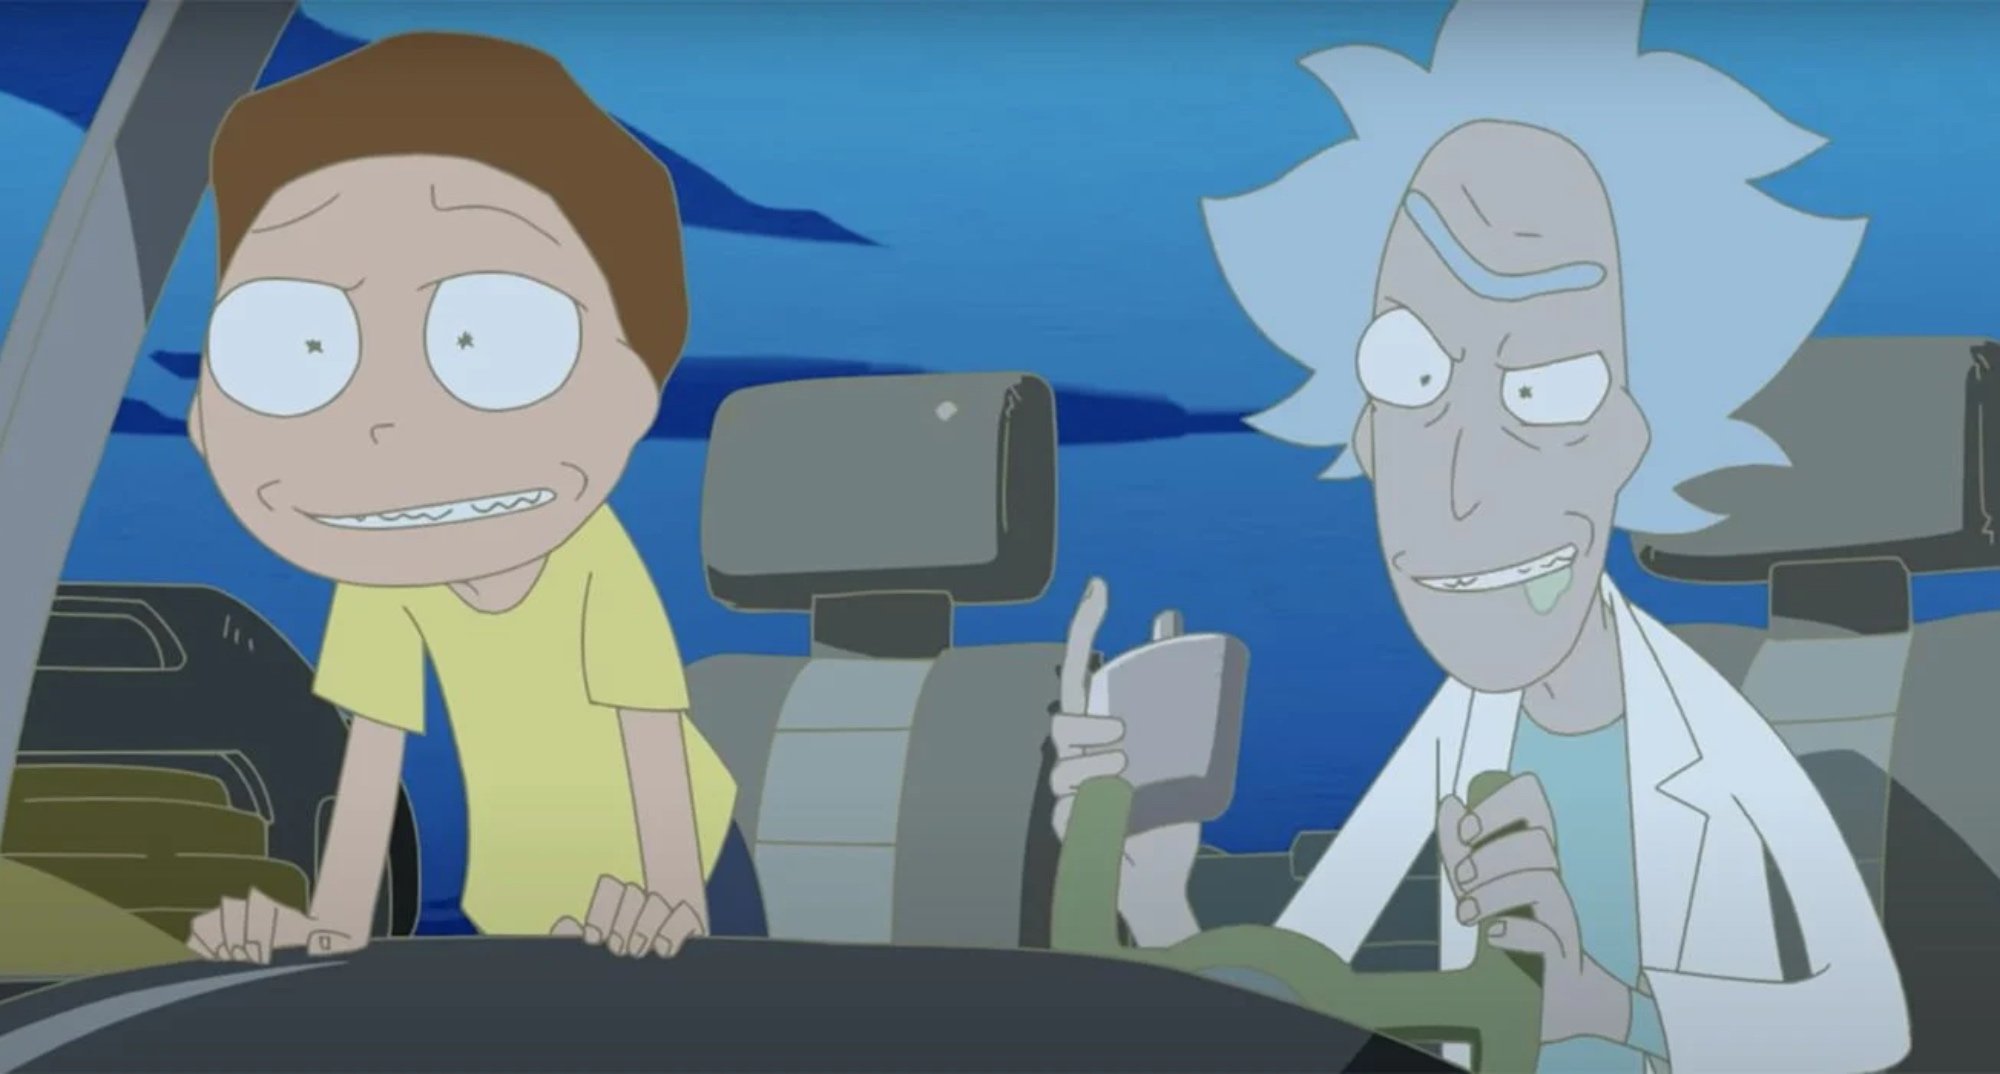 Rick and Morty in anime short 'Rick and Morty vs. Genocider' in space cruiser.